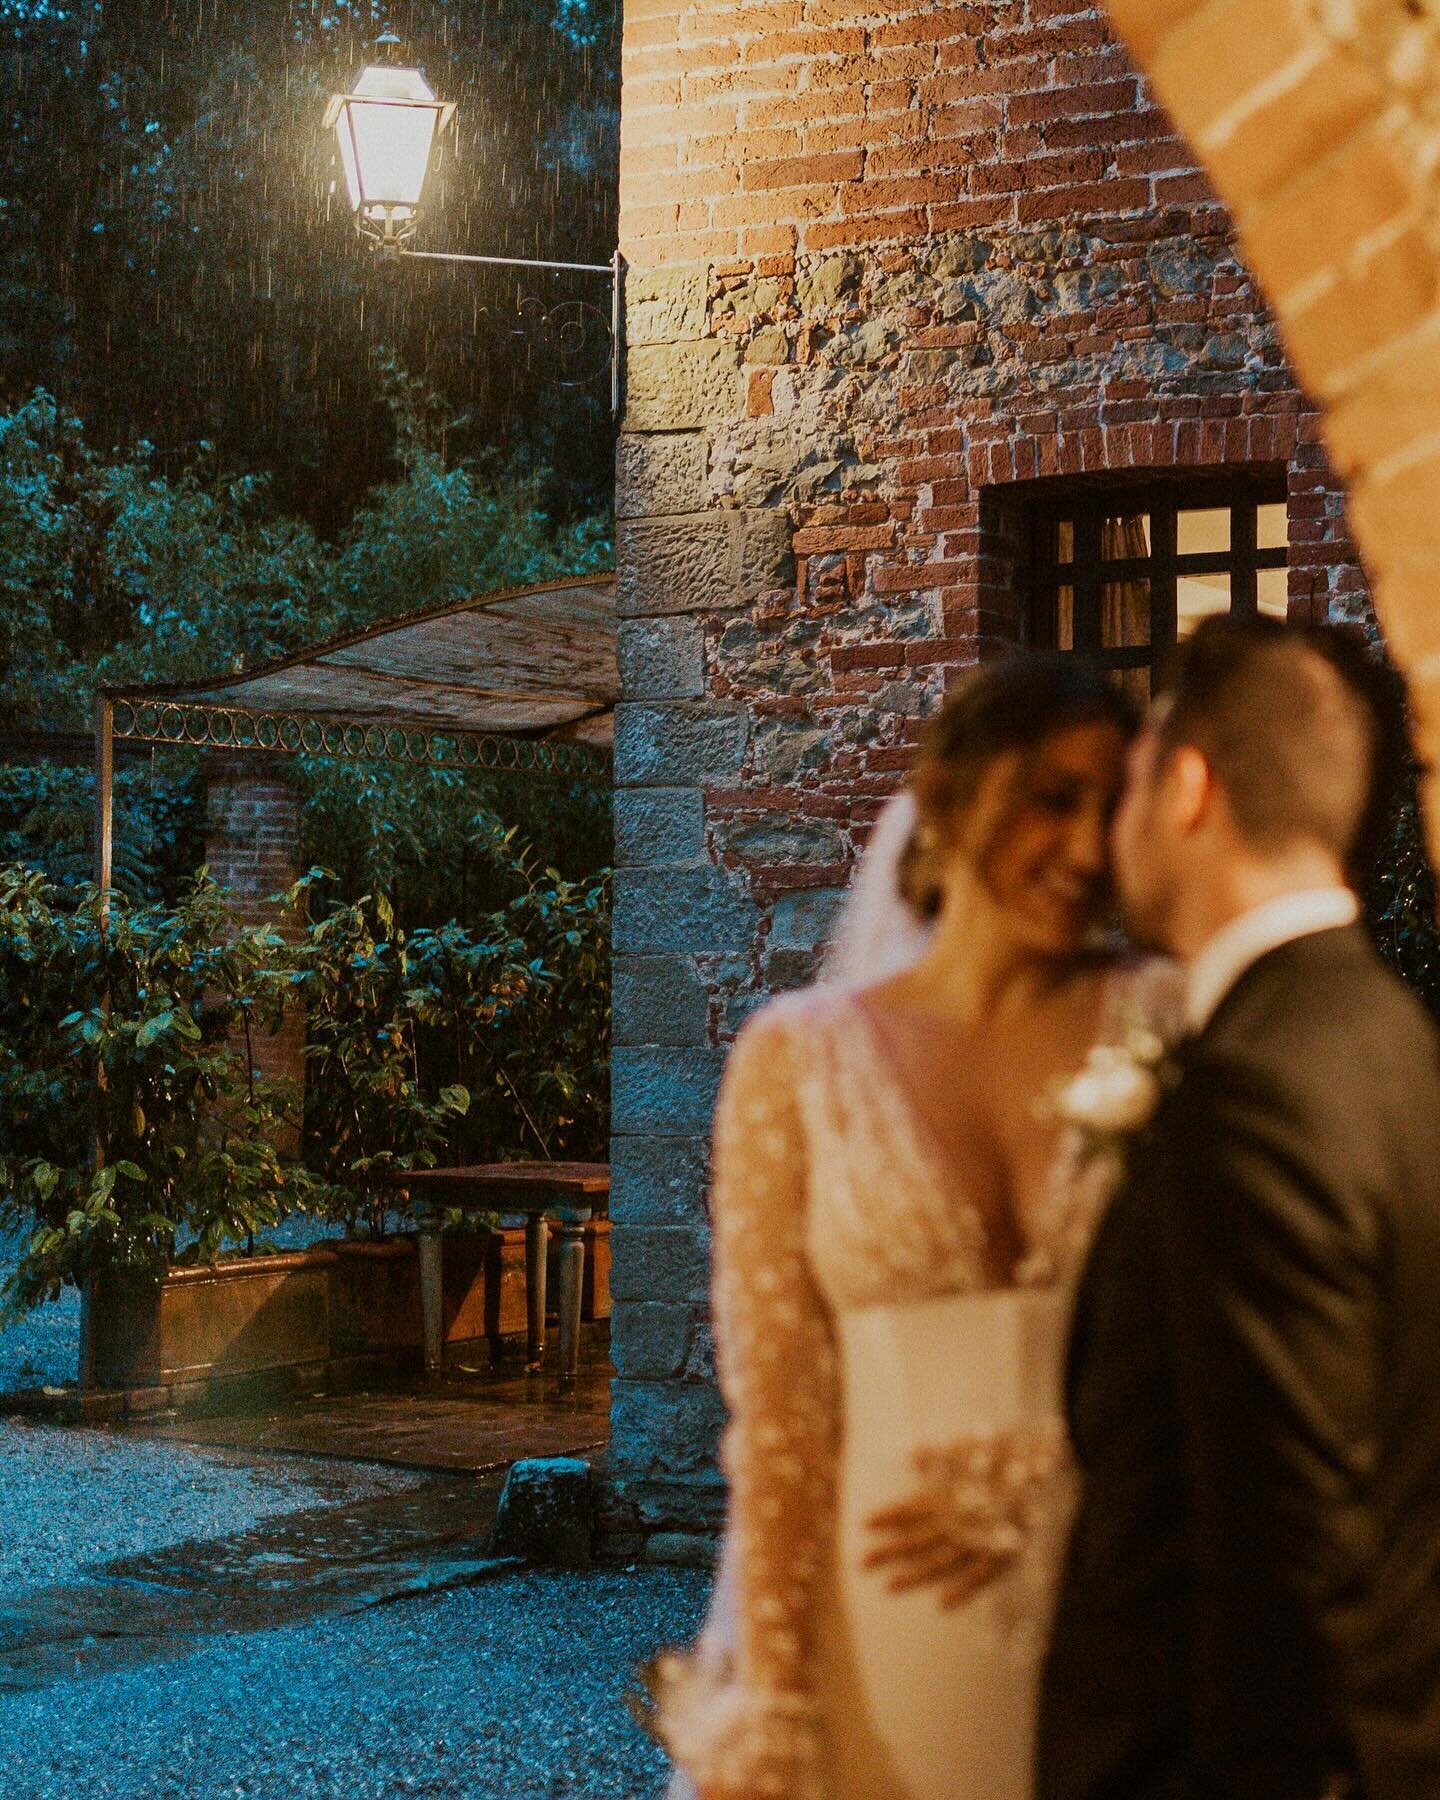 Reminiscing on the absolute dreamiest Italian elopement with two of the most amazing people 💫🇮🇹

We watched the forecast in Tuscany for a few days, seeing the inevitable rain predicted for September 24th not wavering at all. When you think of an e